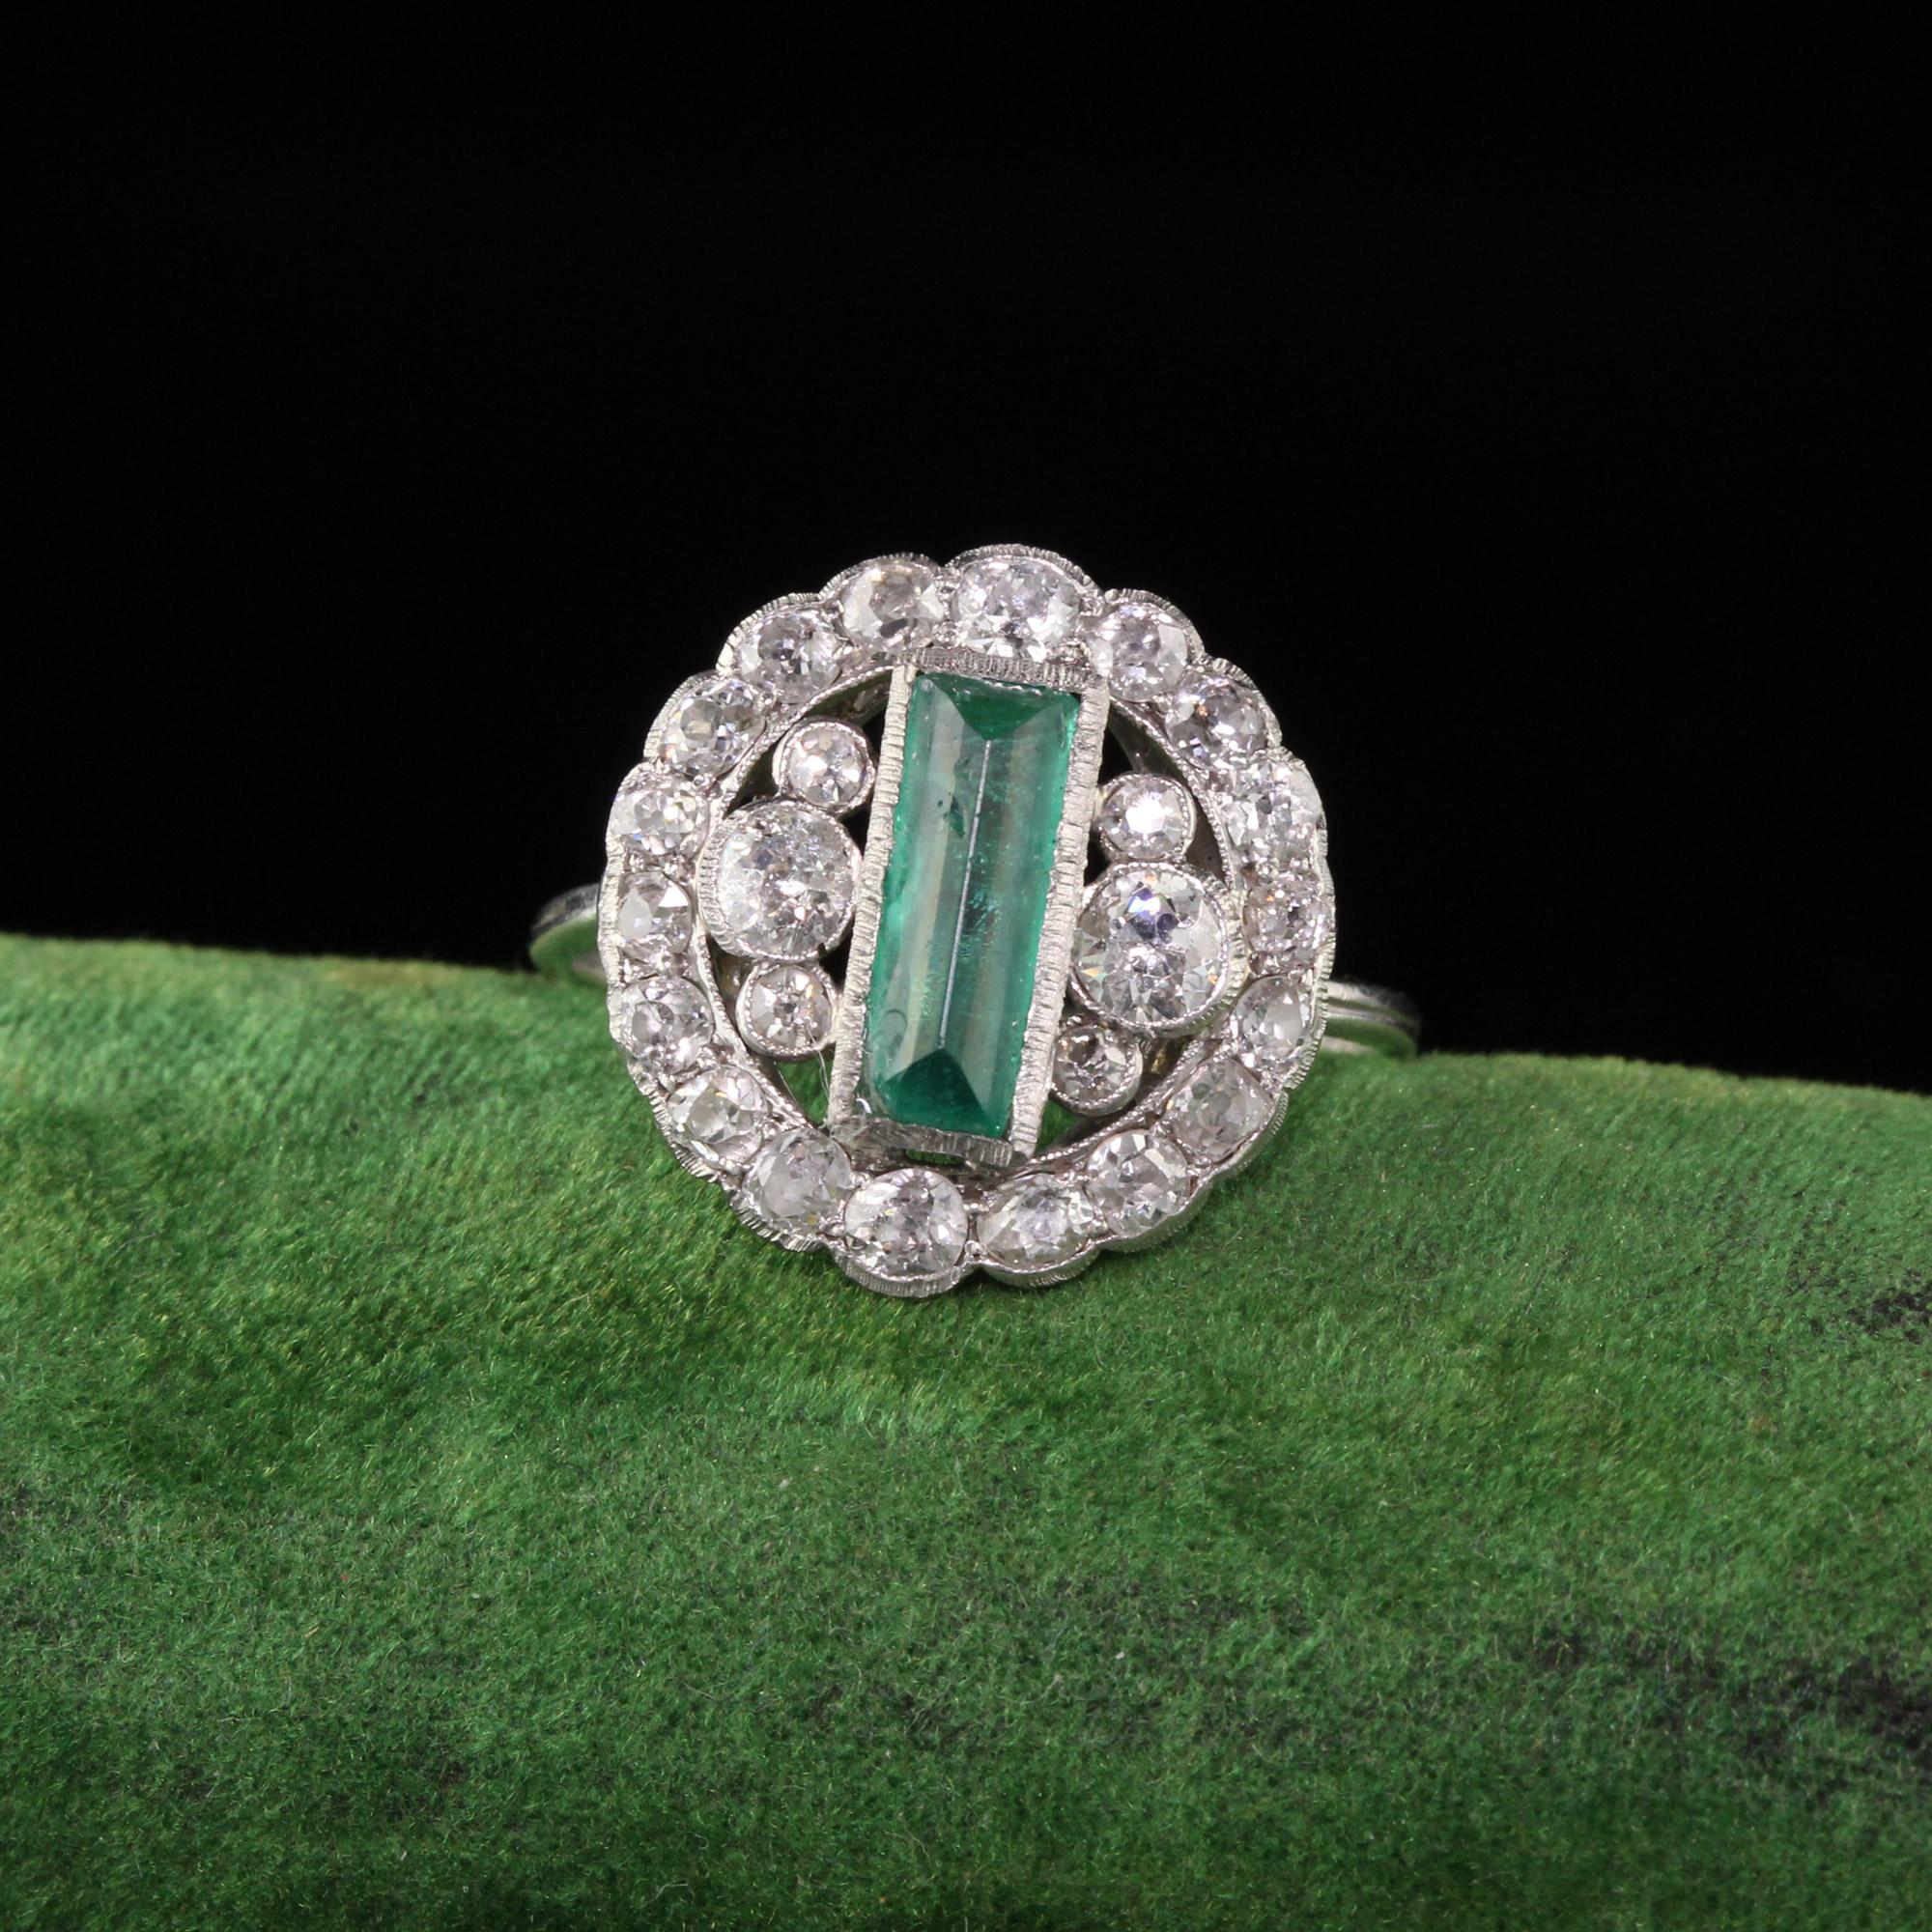 Gorgeous Art Deco diamond and emerald cocktail ring. One corner of the emerald is chipped. 

#R0430

Metal: Platinum

Weight: 4.7 Grams

Total Diamond Weight: Approximately 2.00 CTS

Diamond Color: H - I

Diamond Clarity: SI2

Emerald Measurement: